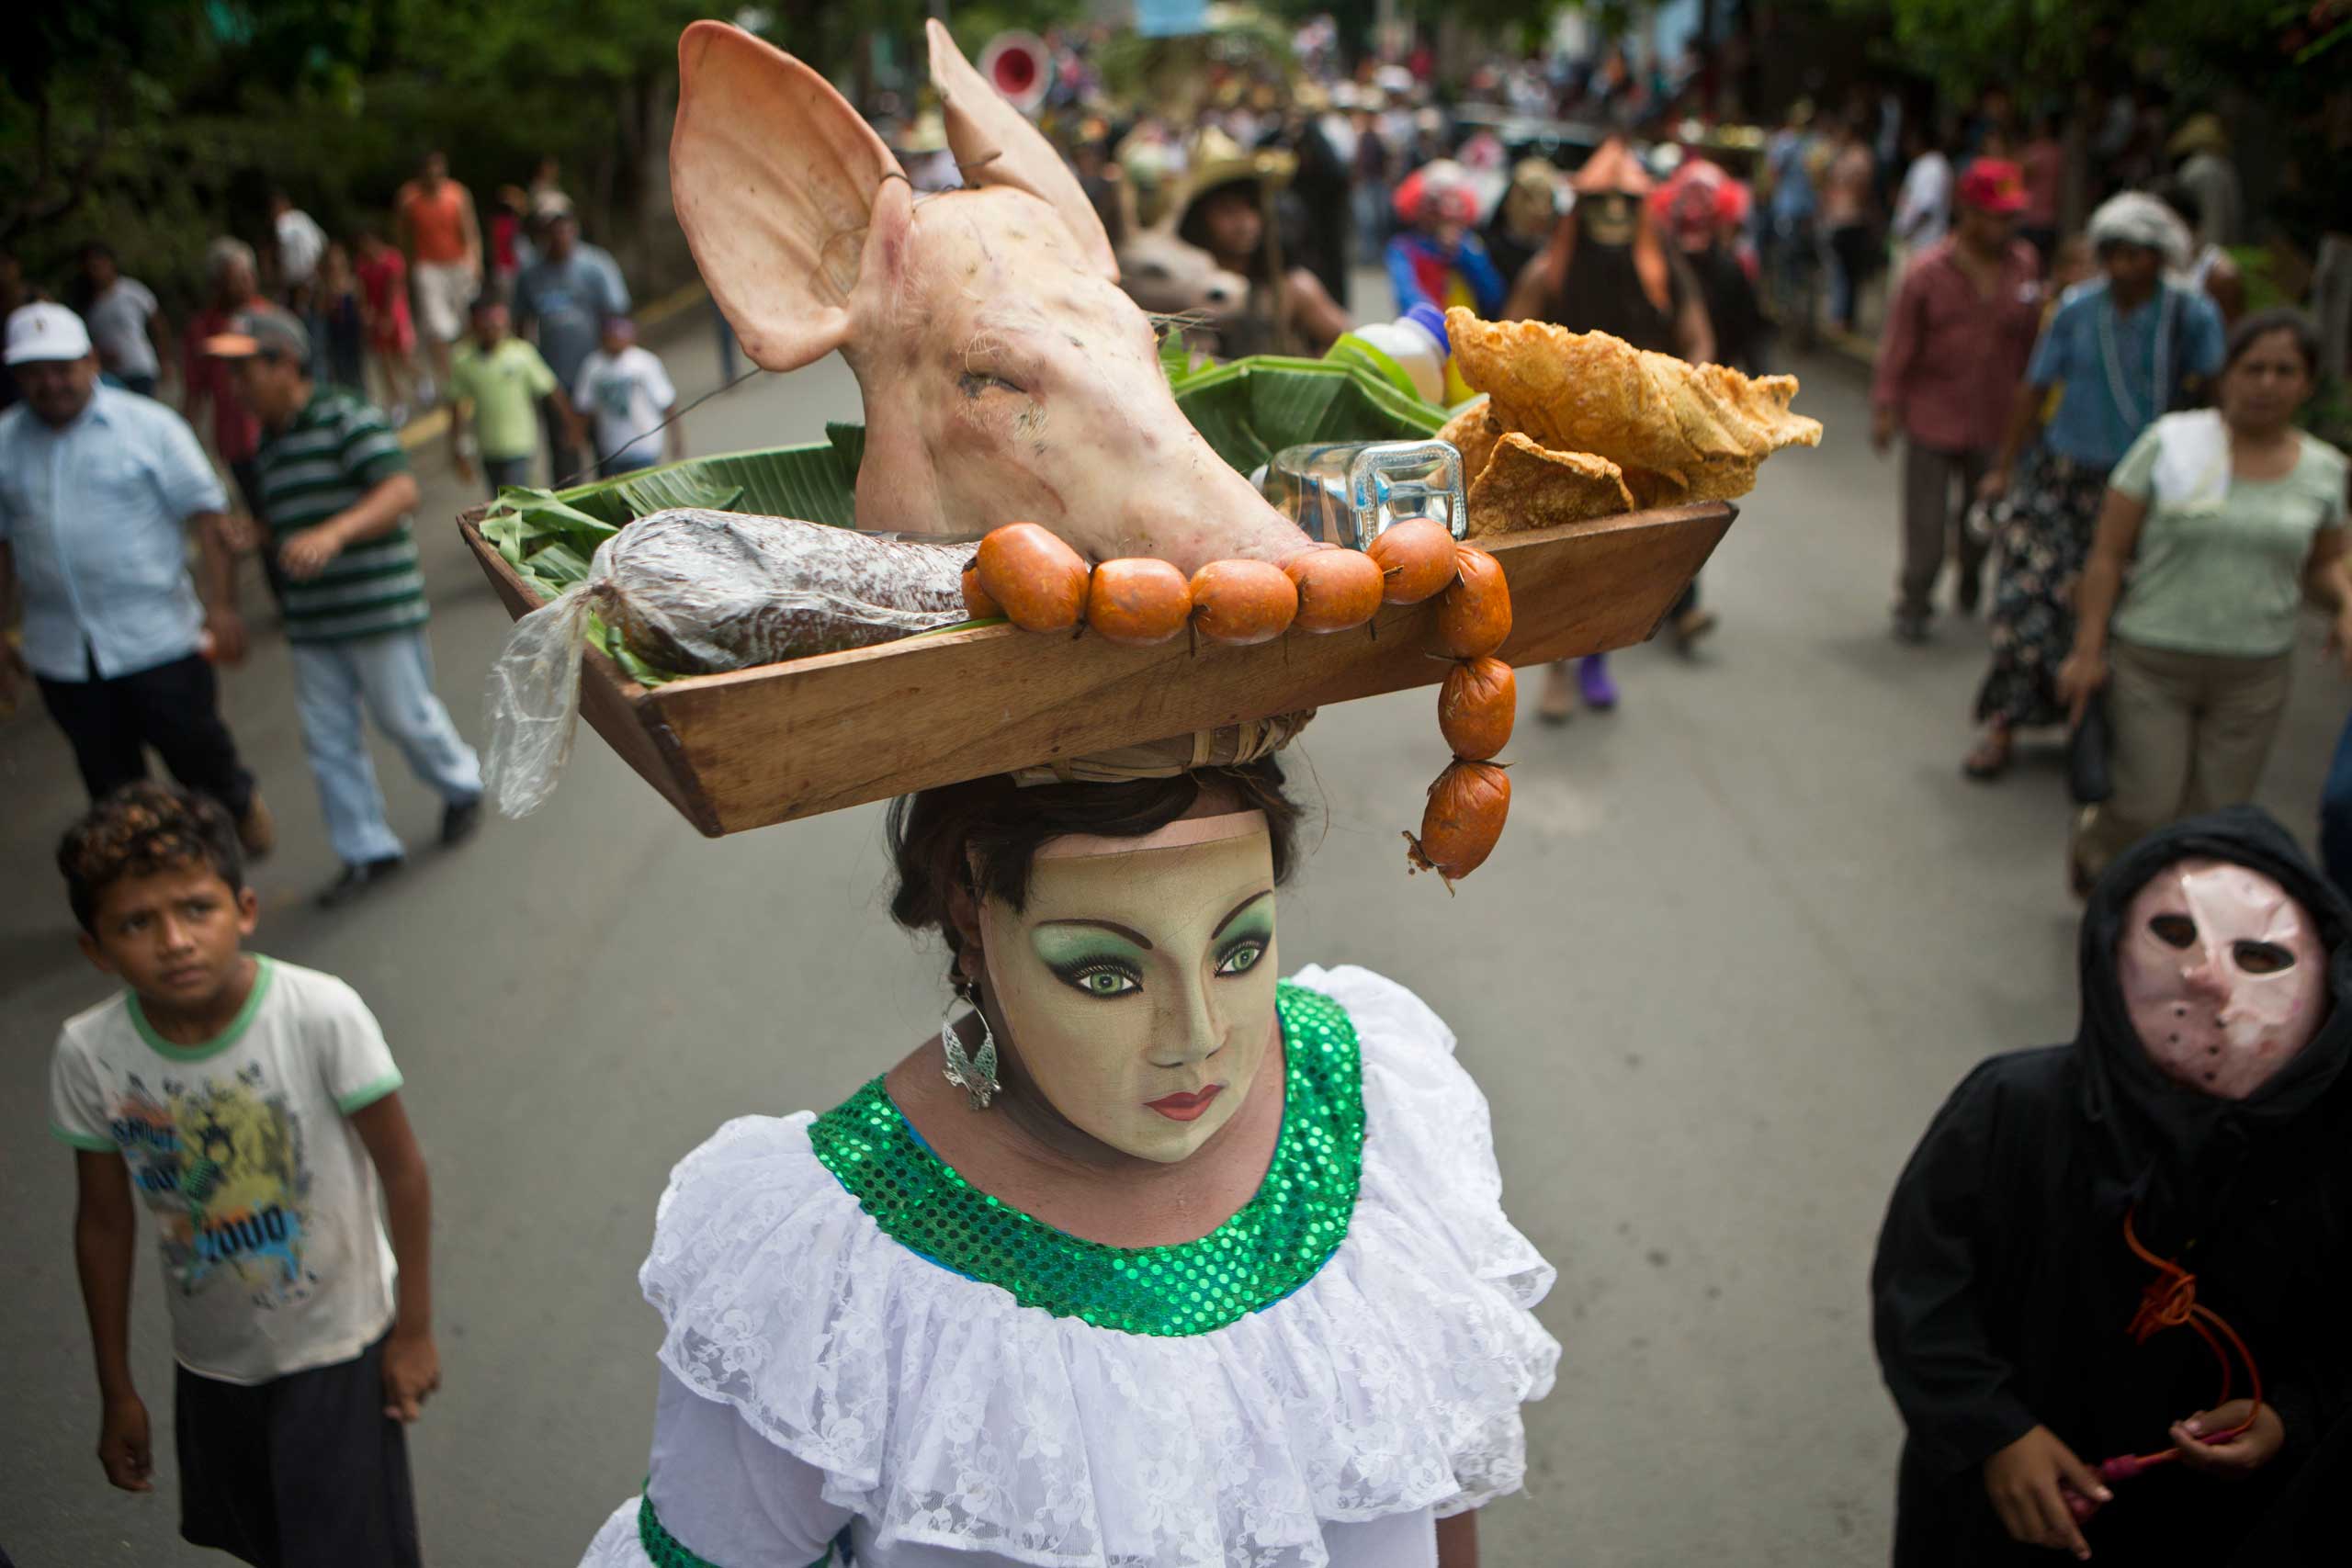 A man dressed as a woman carries a pig's head on a platter balanced on his head during the celebration of Torovenado, a satirical dance festival, in honor of Masaya's patron saint, San Jeronimo, in Masaya, Nicaragua, Oct 26, 2014.